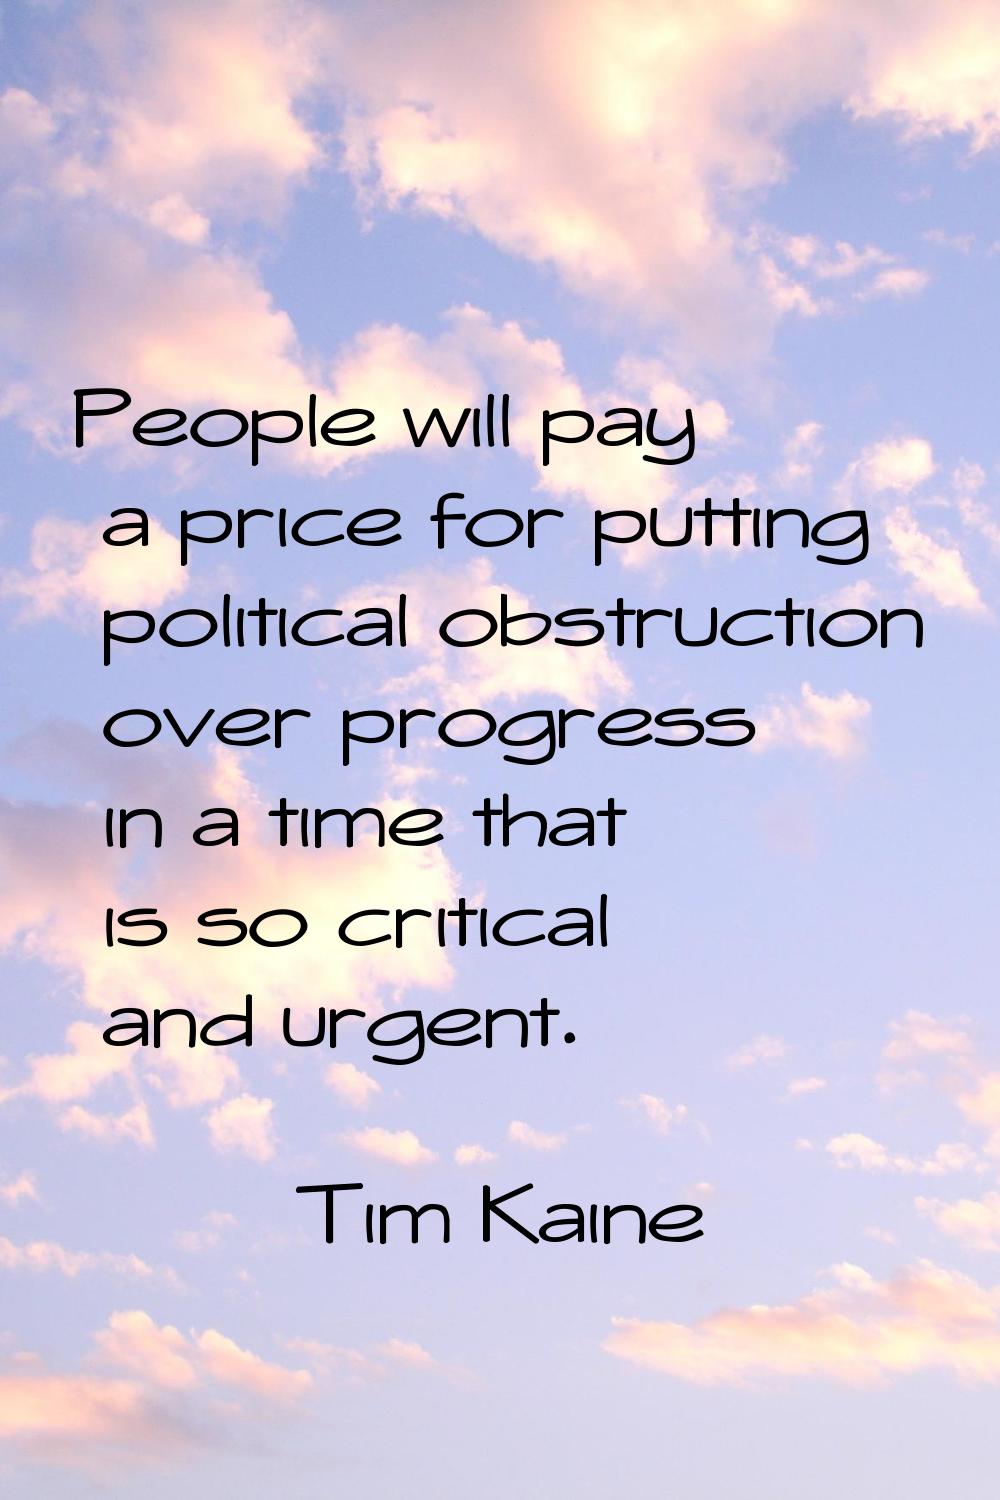 People will pay a price for putting political obstruction over progress in a time that is so critic